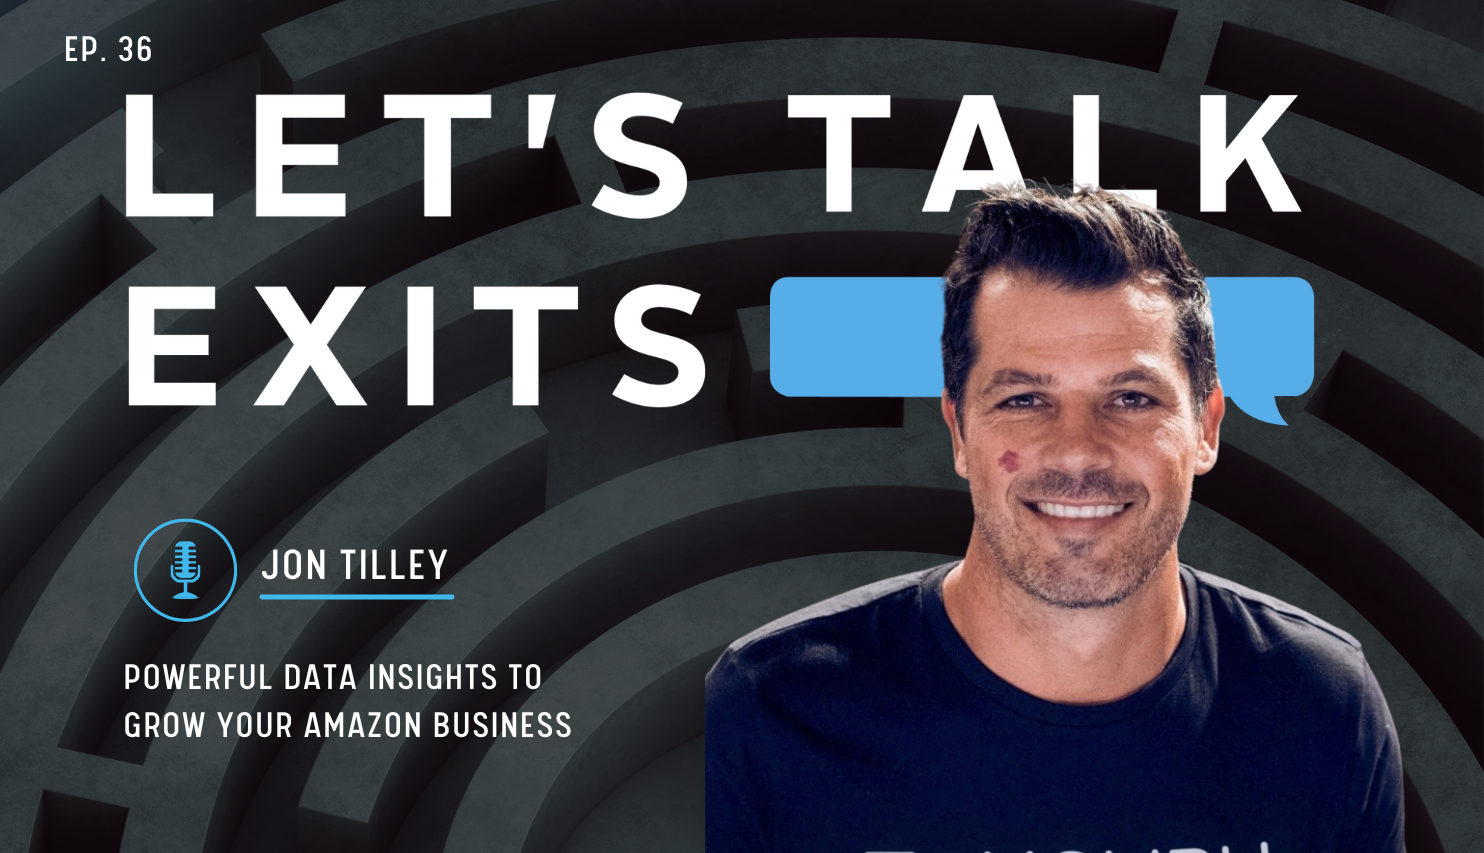 Powerful Data Insights to Grow Your Amazon Business with Jon Tilley